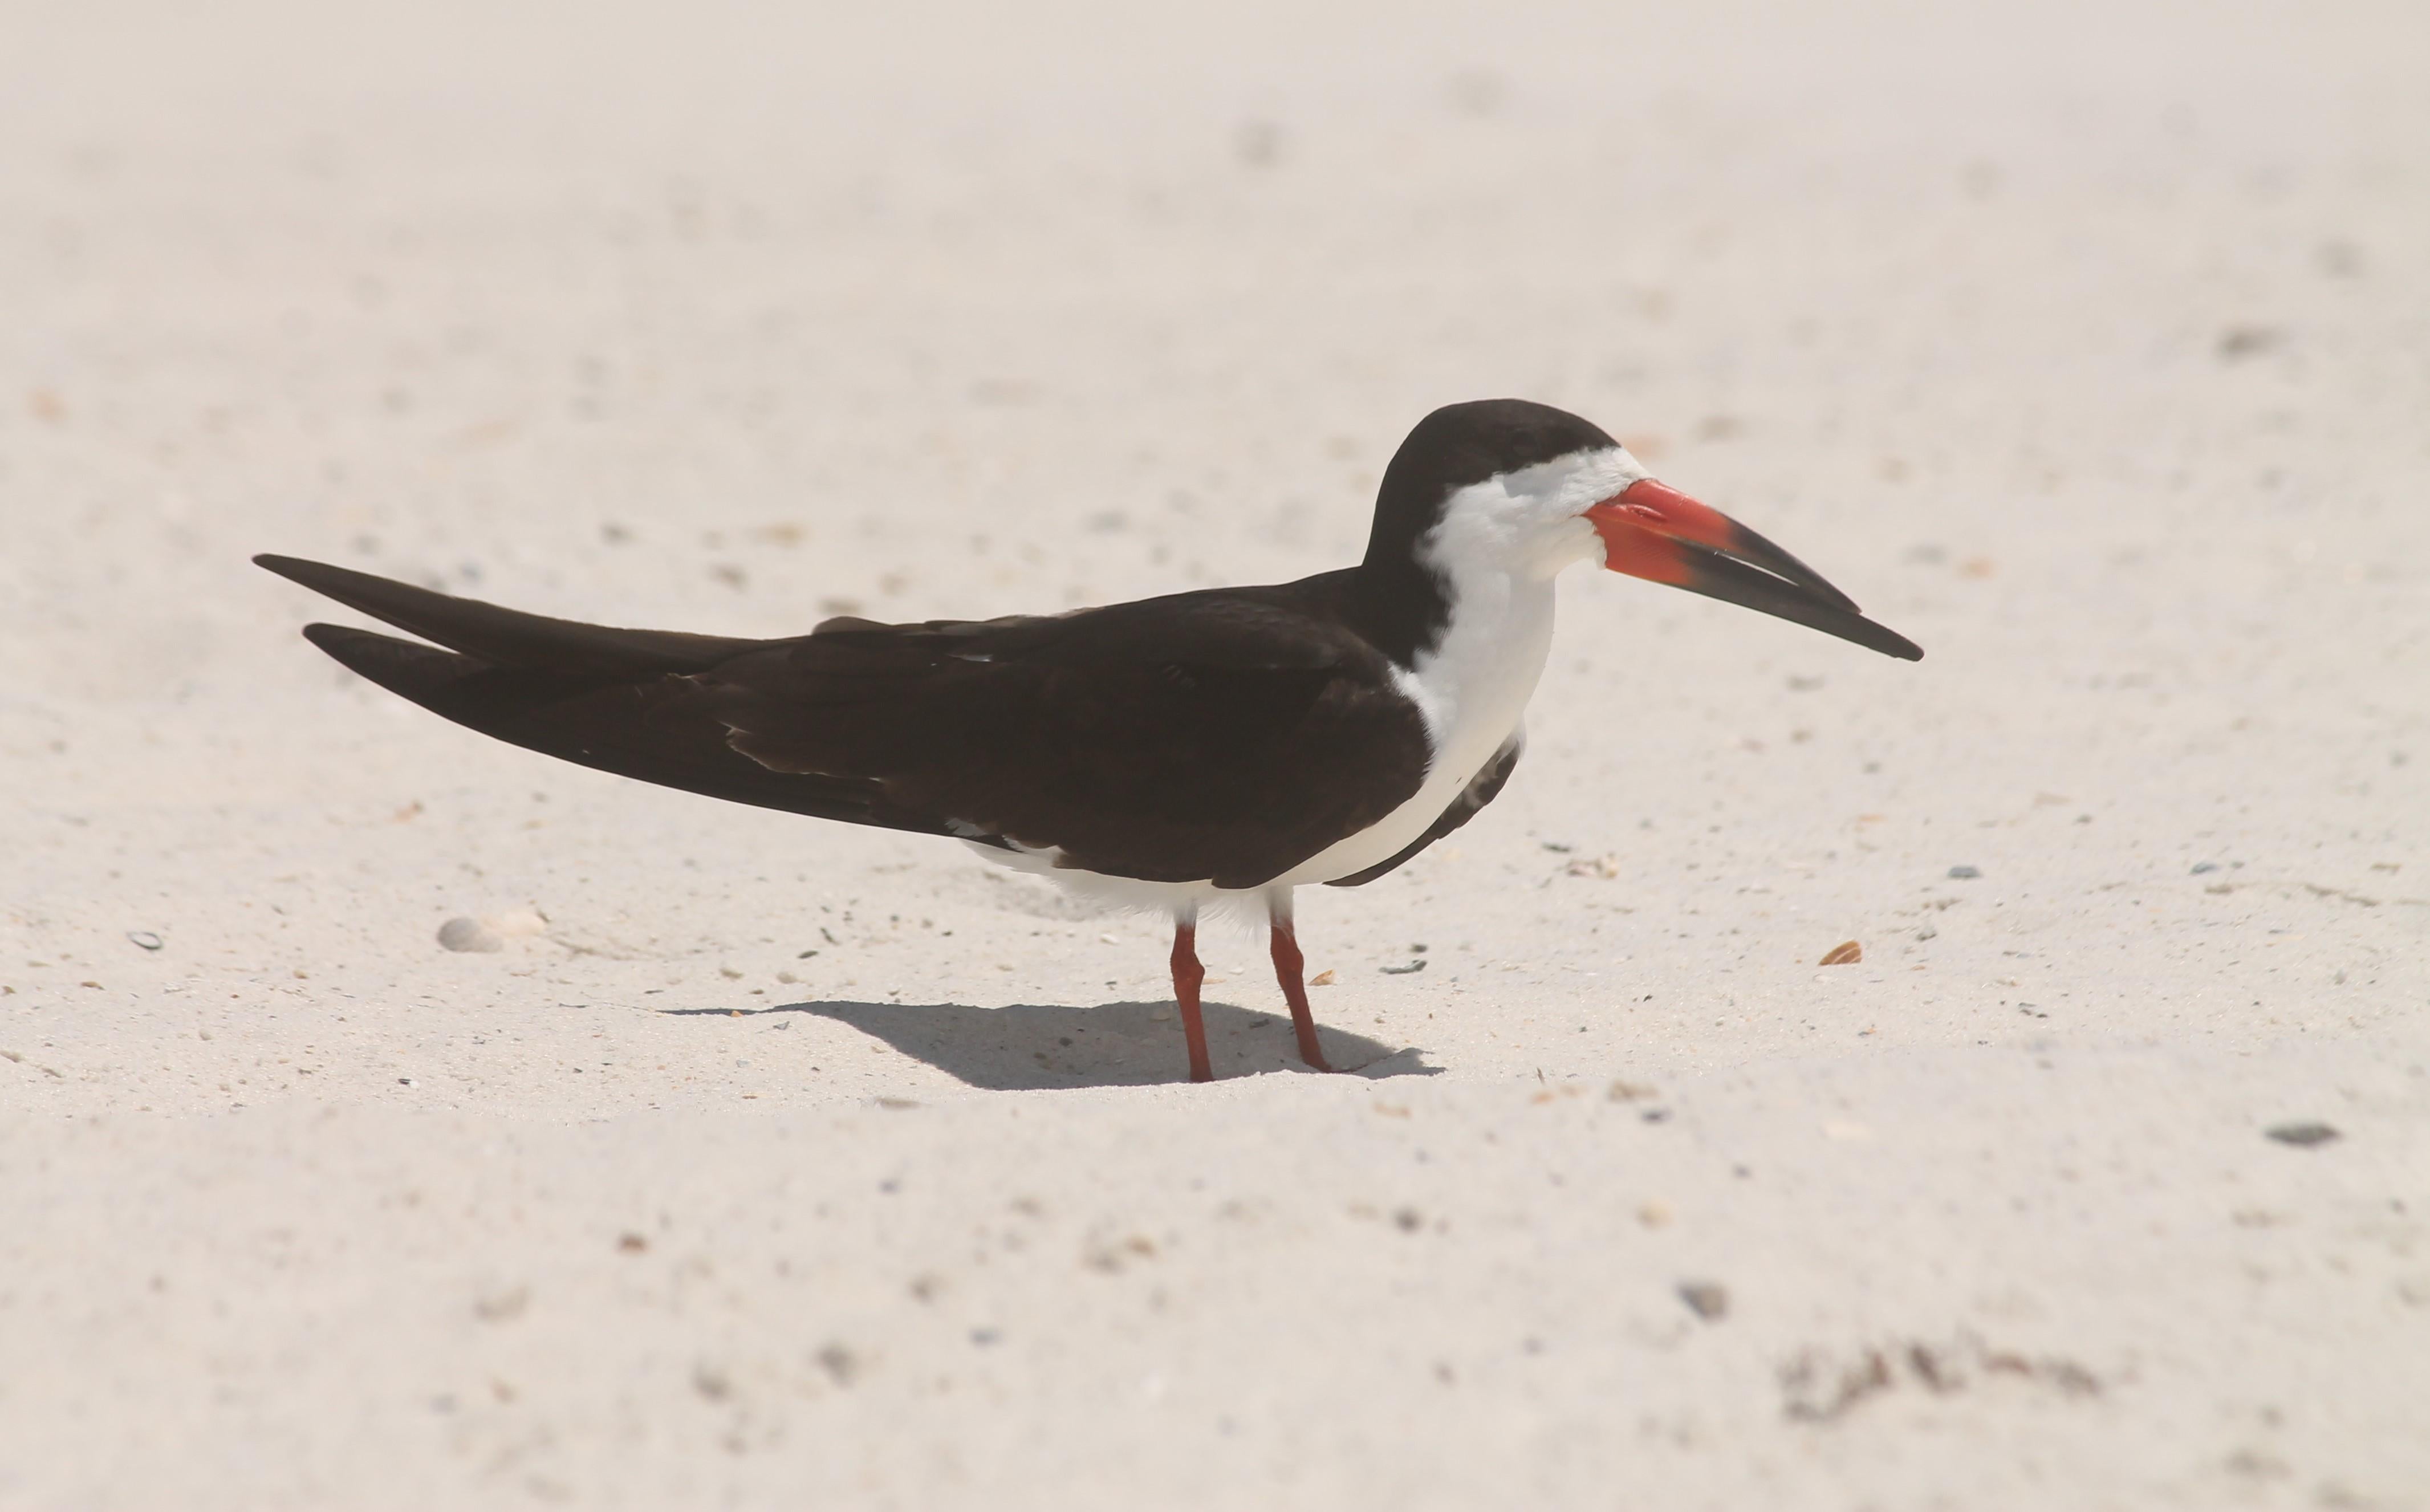 Black Skimmer Stands Along the Shore. Photo by Farren Dell